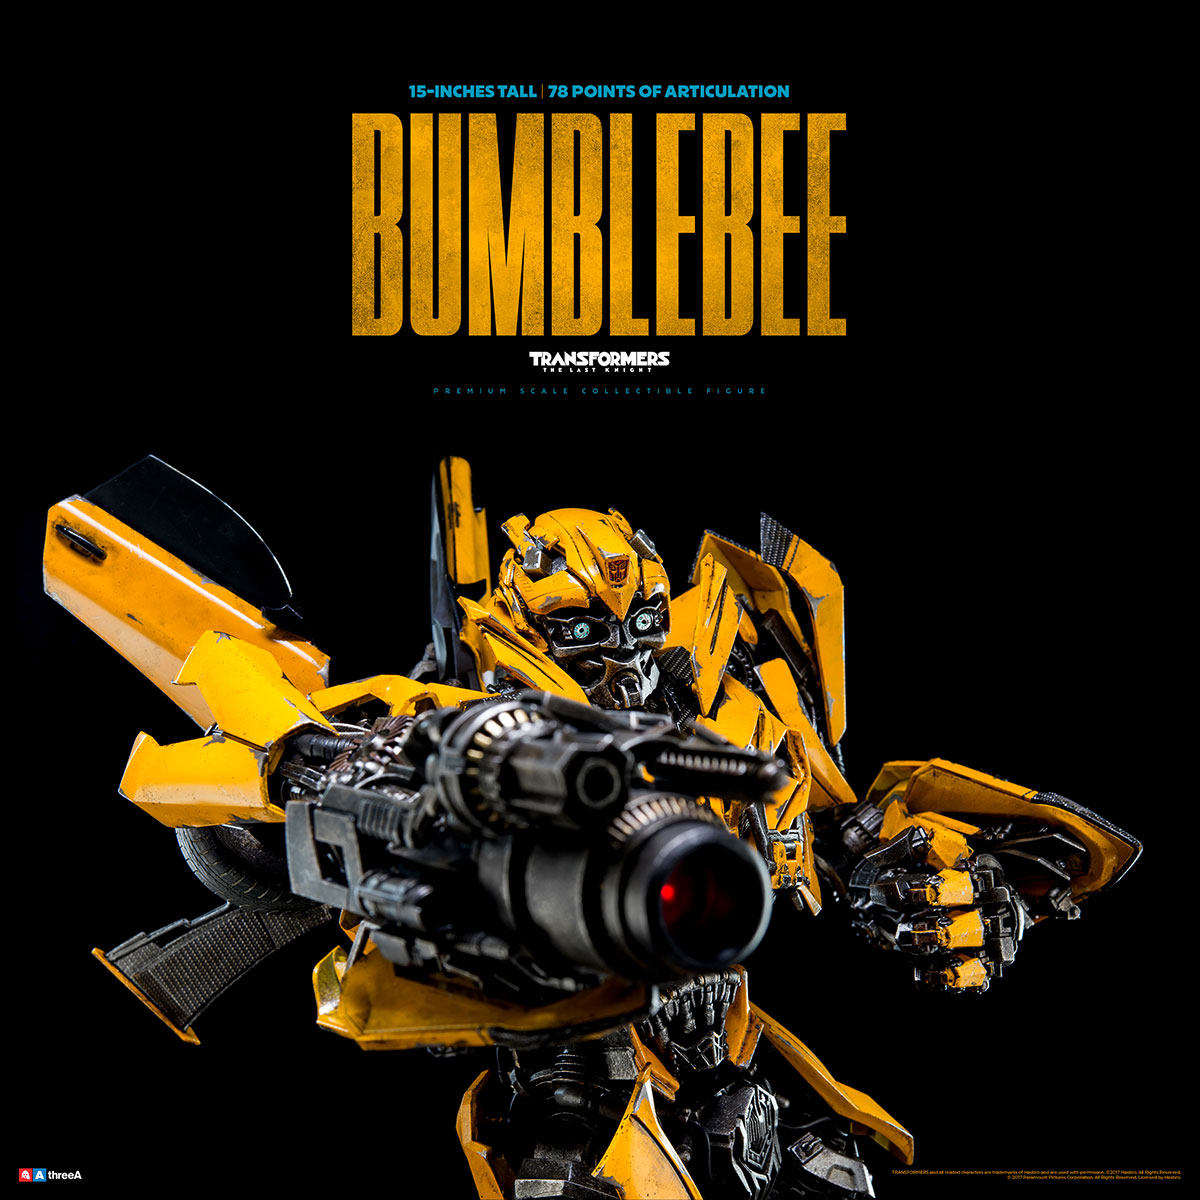 3a transformers the last knight bumblebee